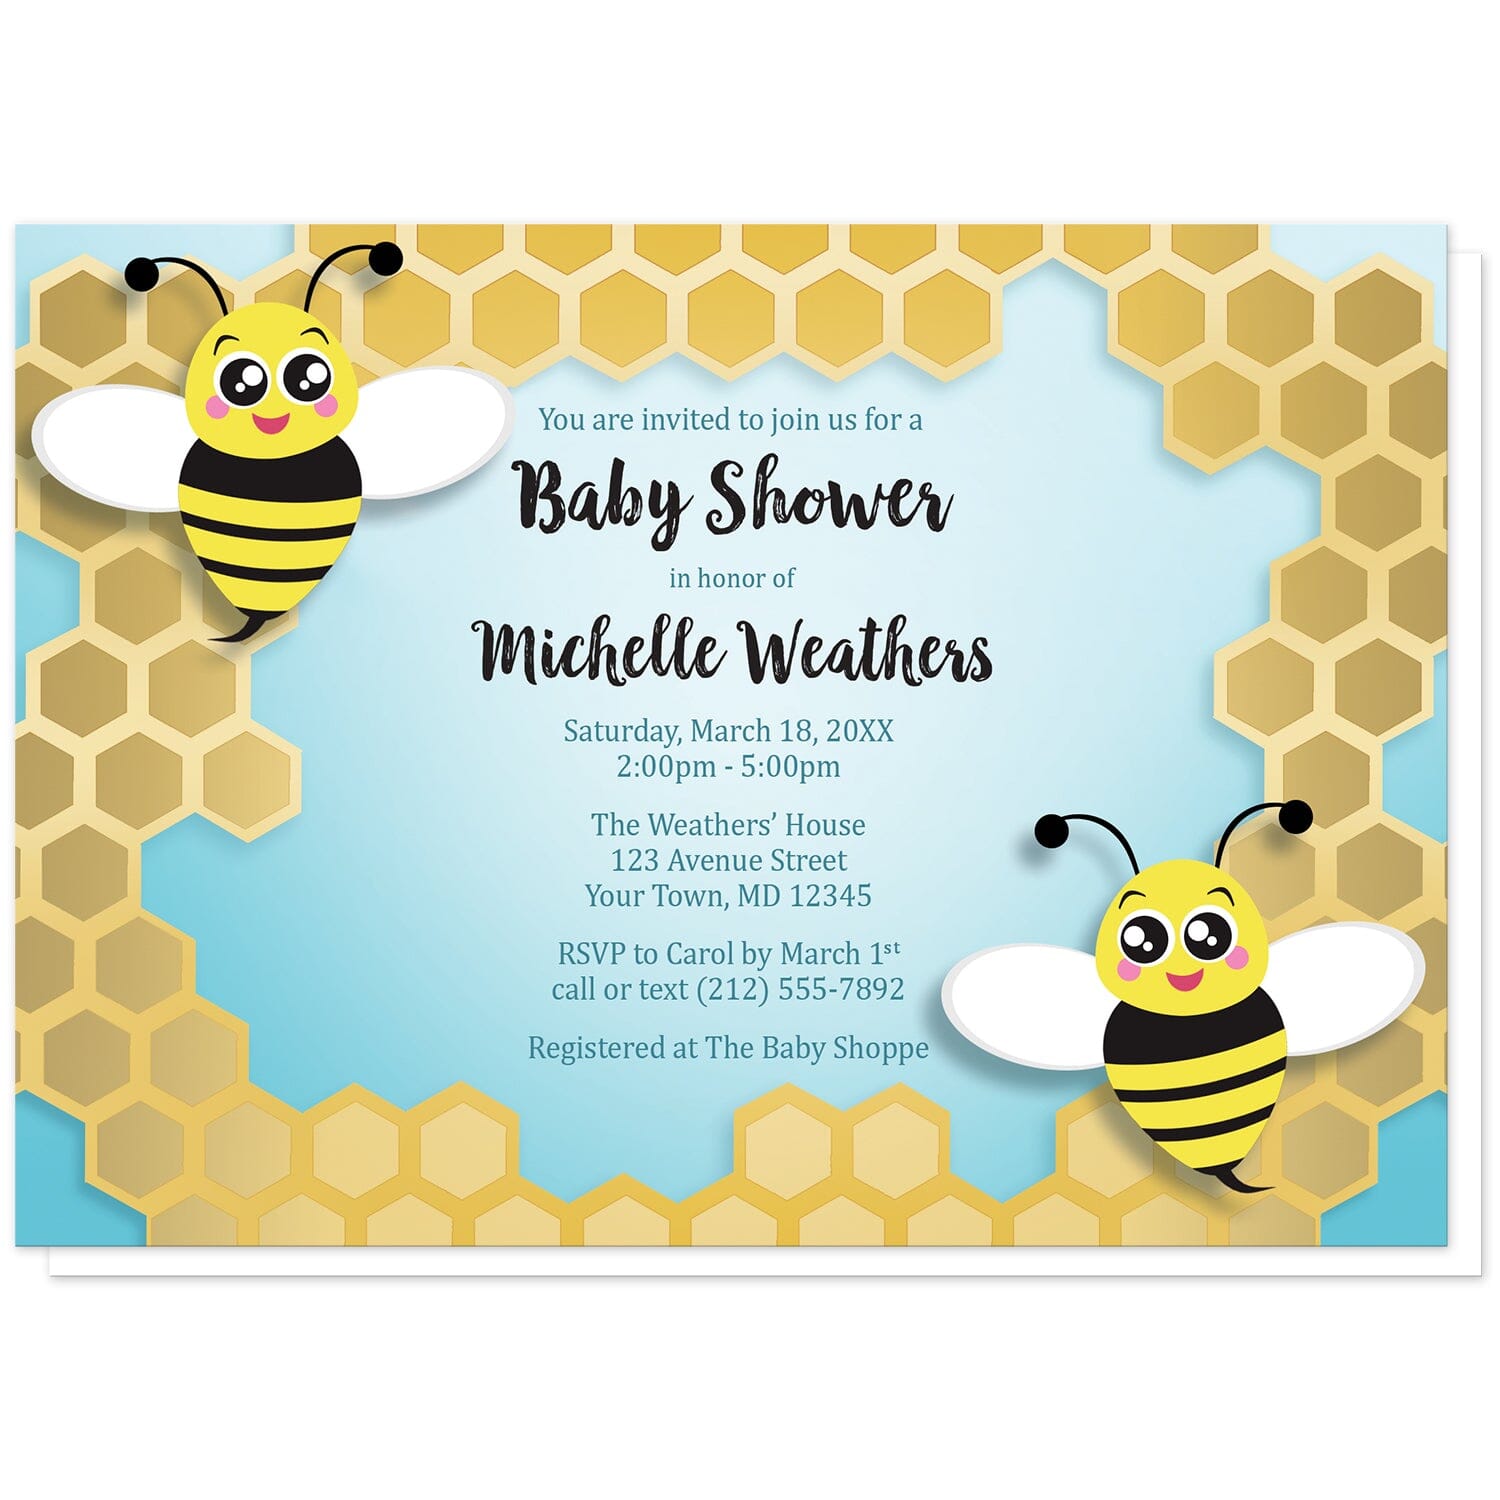 Cute Honeycomb Bee Baby Shower Invitations at Artistically Invited. Cute honeycomb bee baby shower invitations illustrated with two cute bees on opposite corners over an irregular golden yellow honeycomb frame design on a turquoise gradient background. The personalized information you provide for your baby shower celebration will be custom printed in black and dark turquoise in the center over the background color.